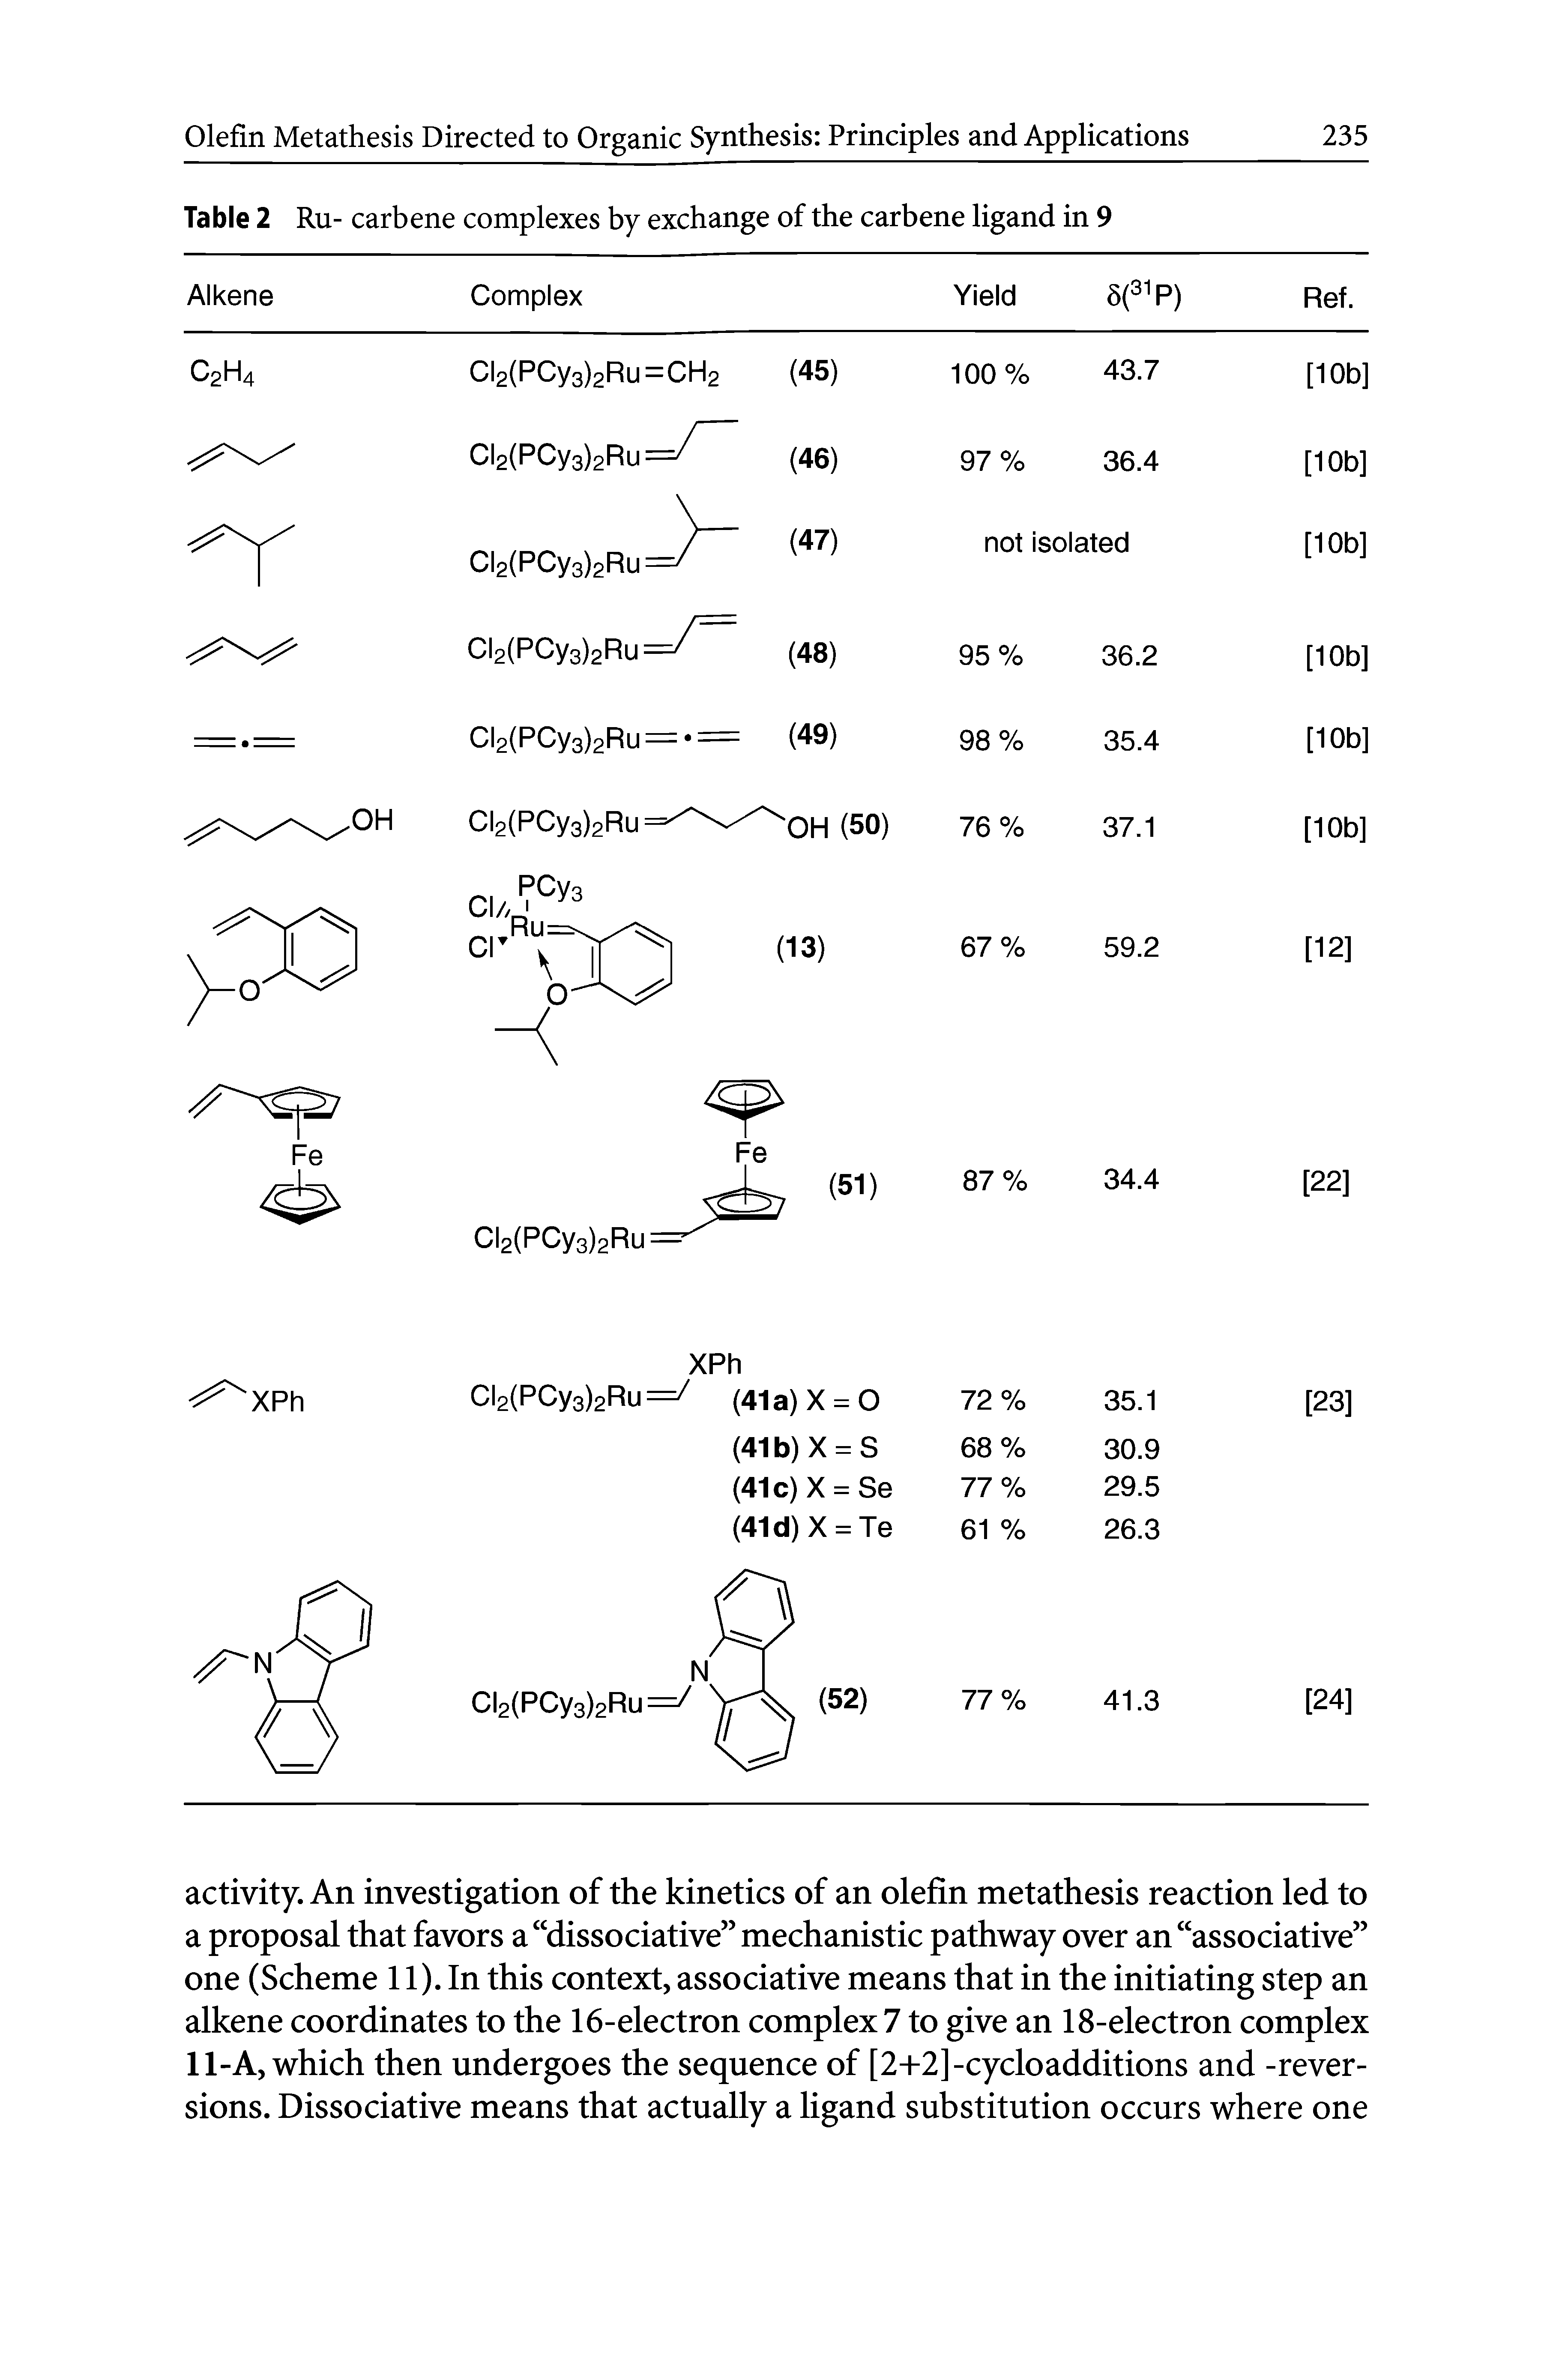 Table 2 Ru- carbene complexes by exchange of the carbene ligand in 9...